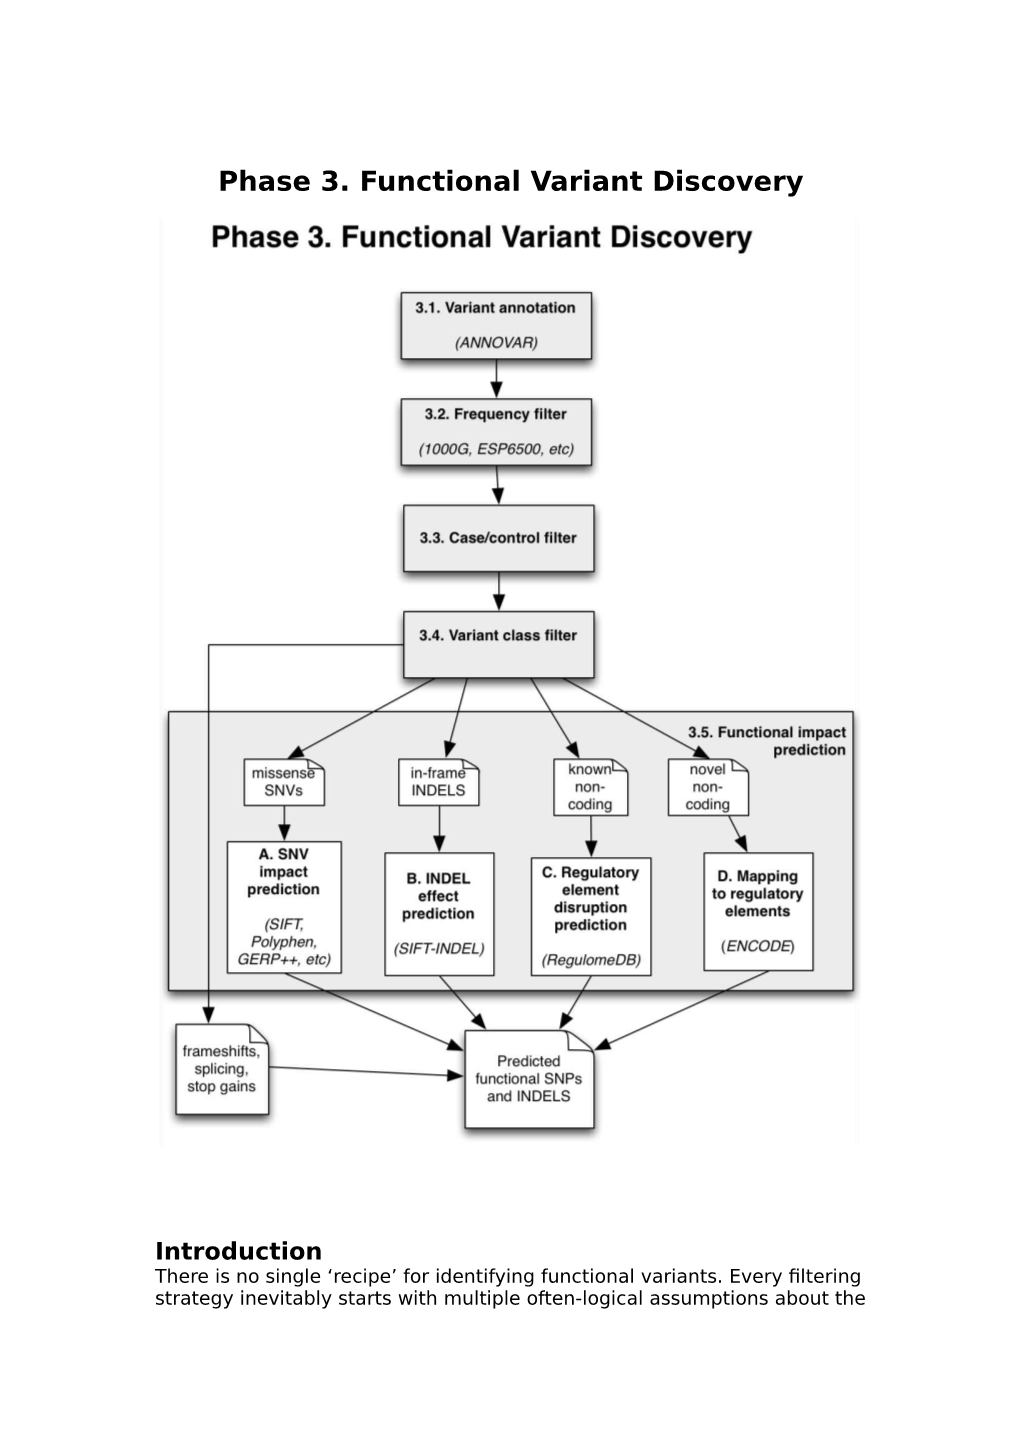 Phase 3. Functional Variant Discovery